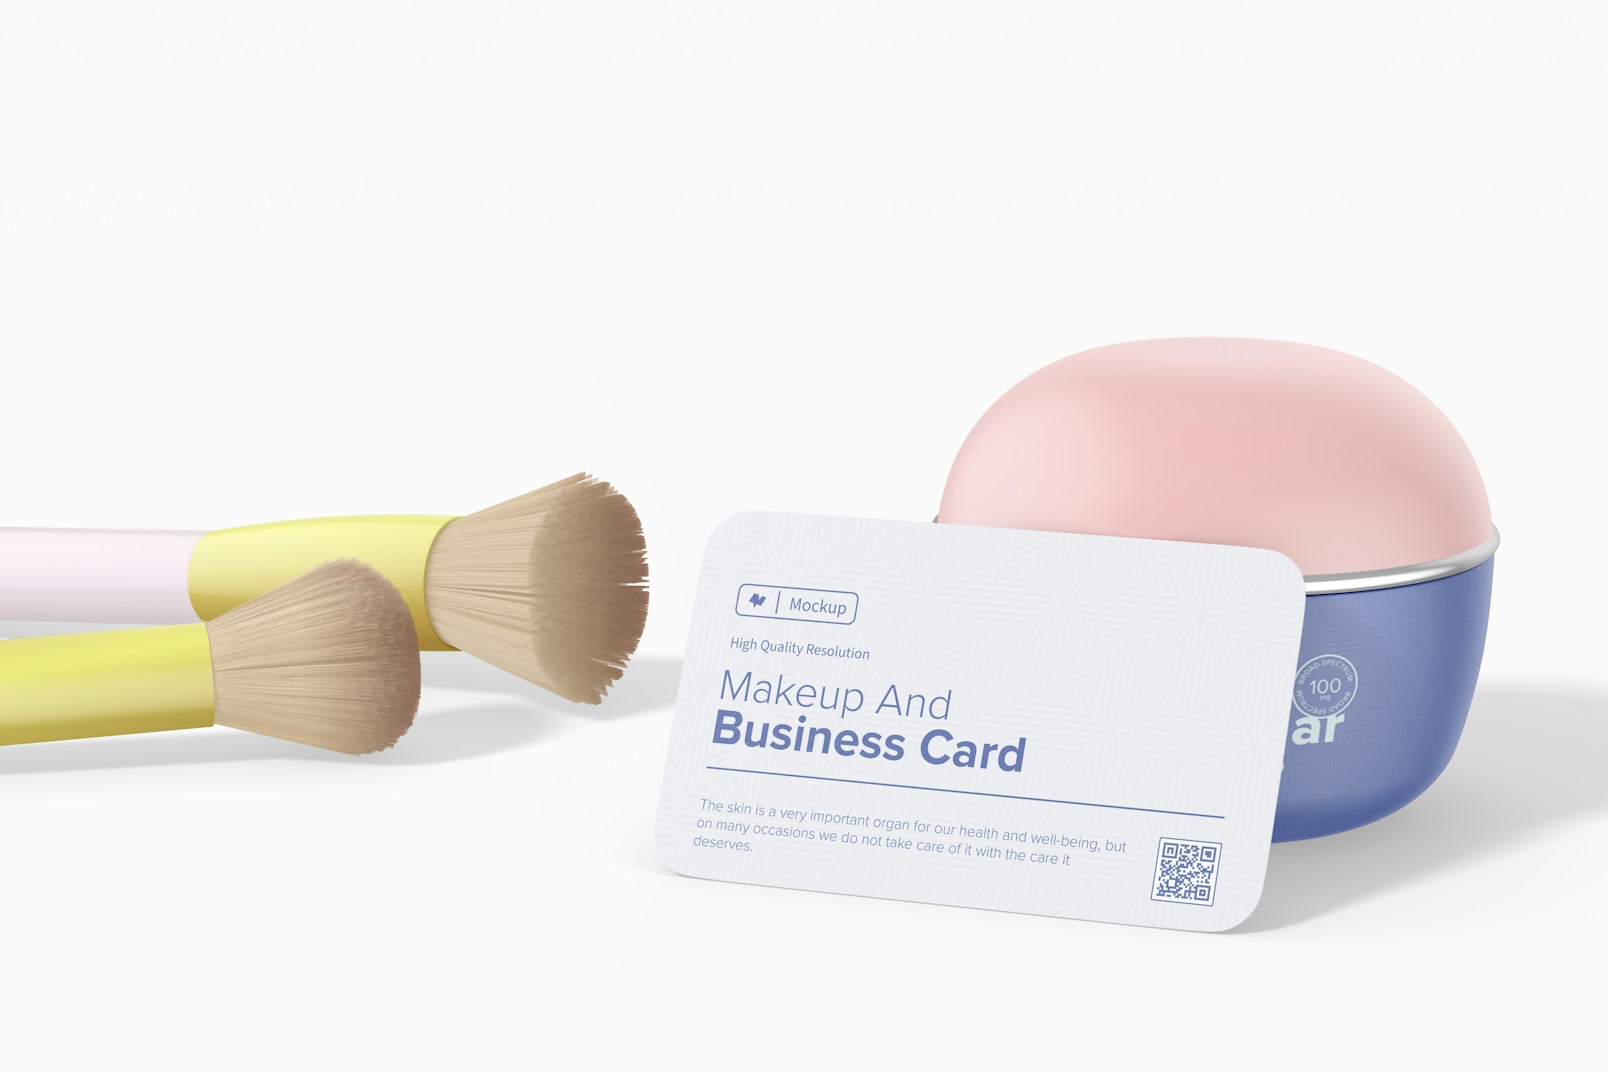 Makeup and Business Card Scene Mockup, Right View